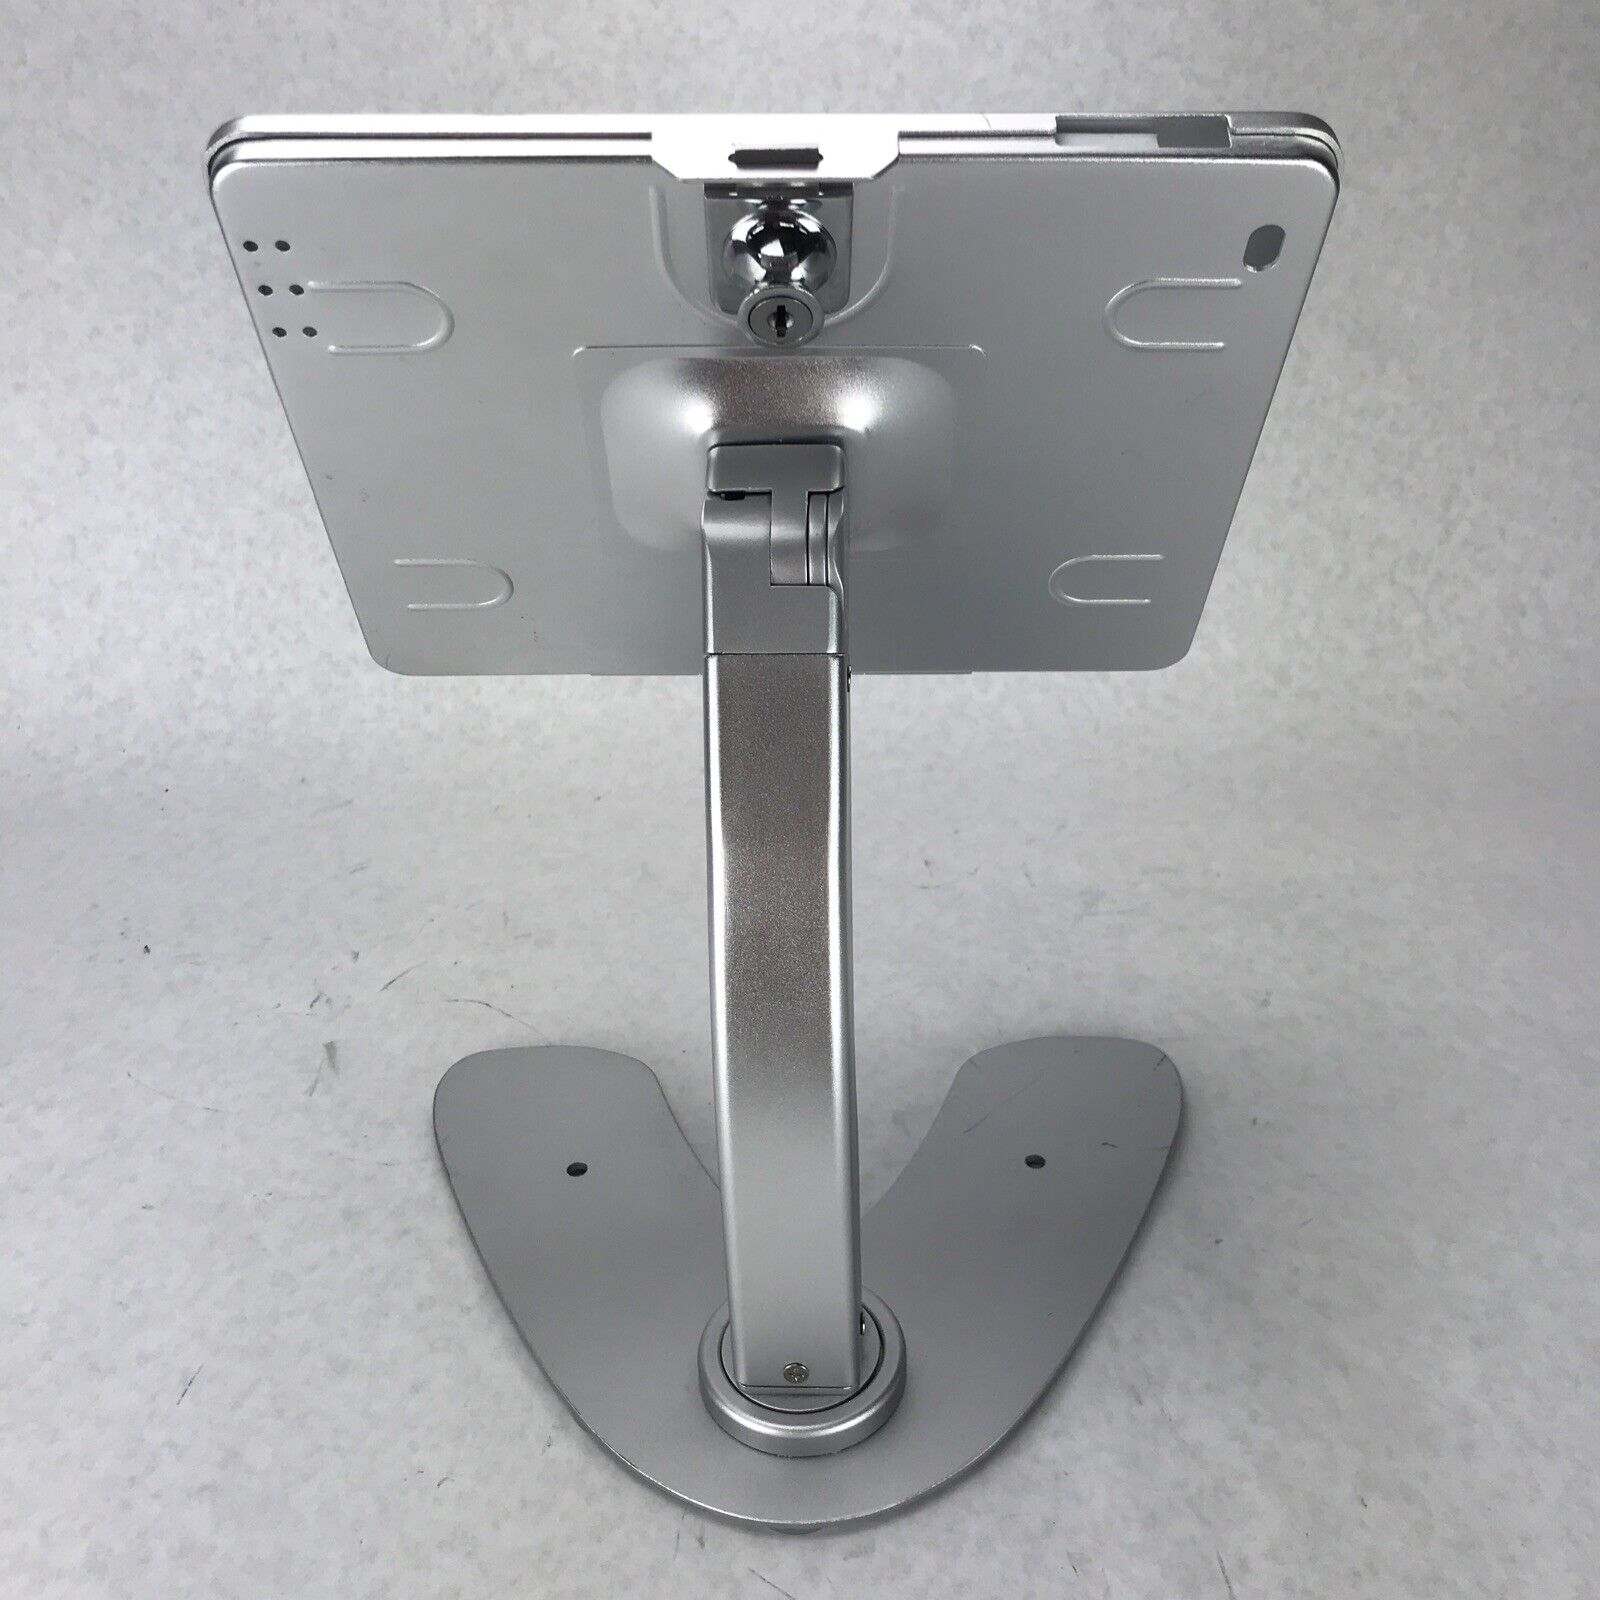 Anti-Theft Lockable Secure Kiosk Tablet Stand Enclosure with Key 9.5" x 7.375"